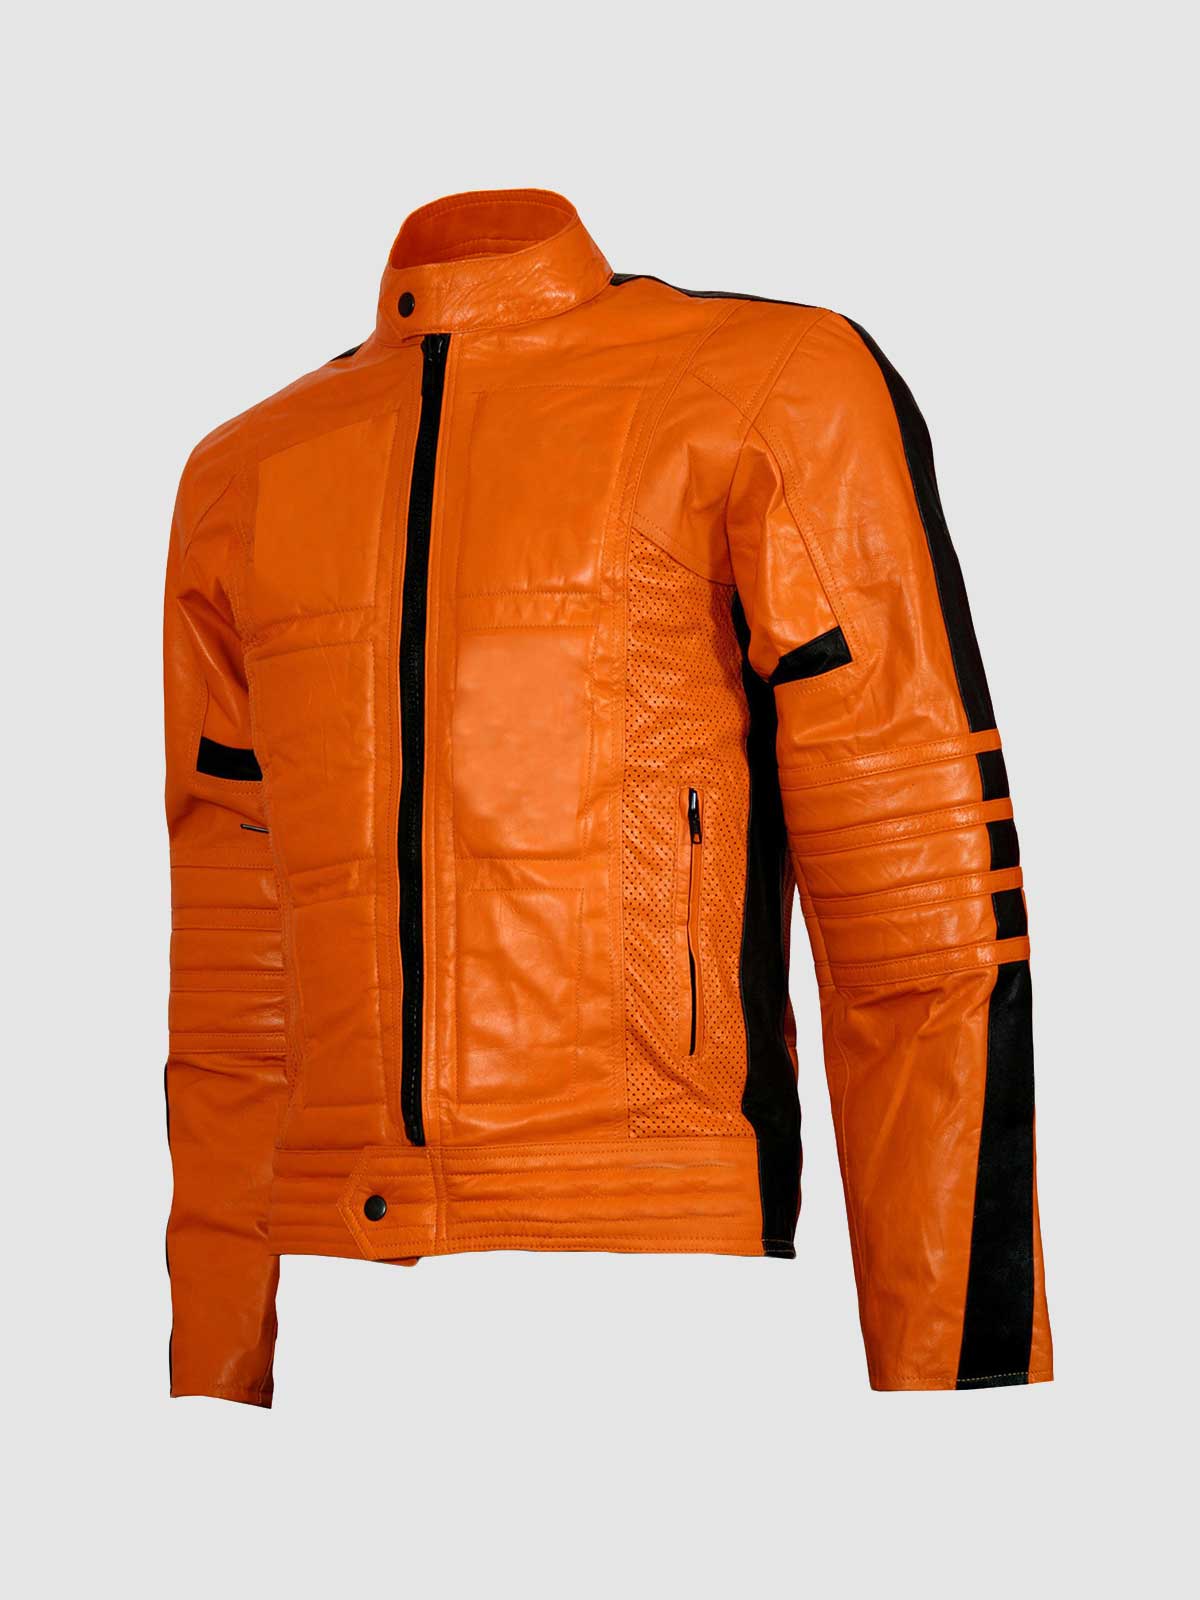 Everything You Need to Know About Choosing an Orange Leather Jacket